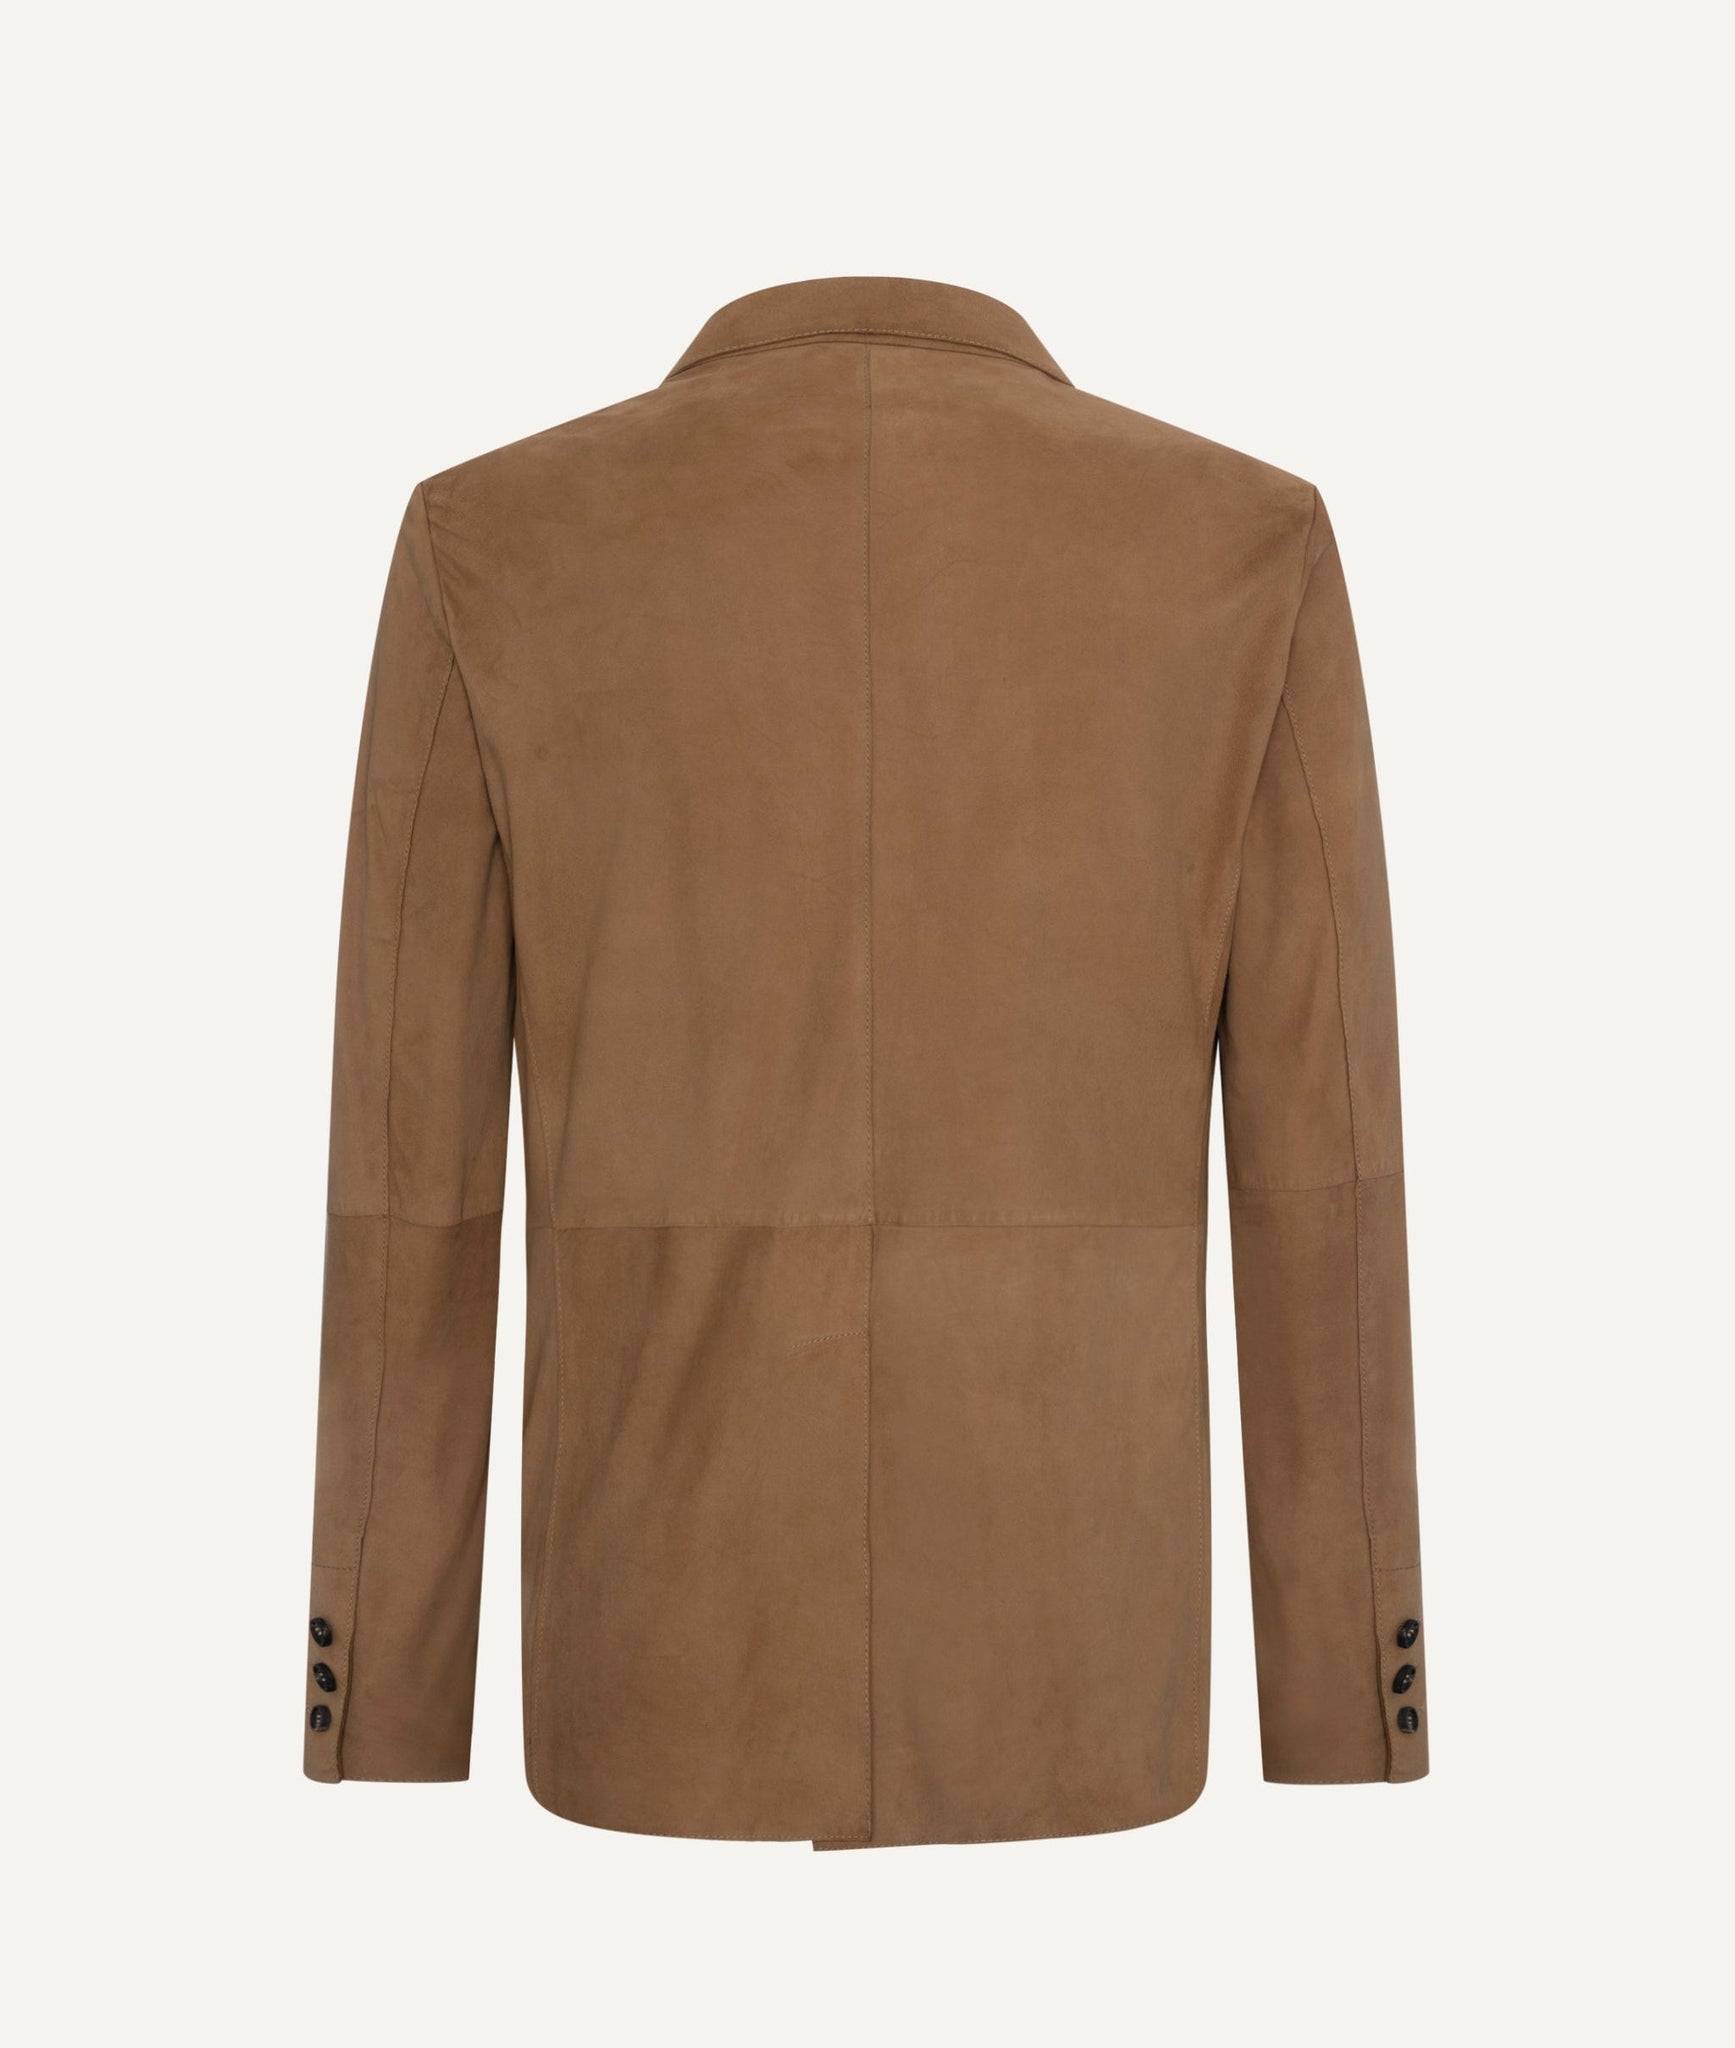 Eleventy - Leather Jacket in Suede